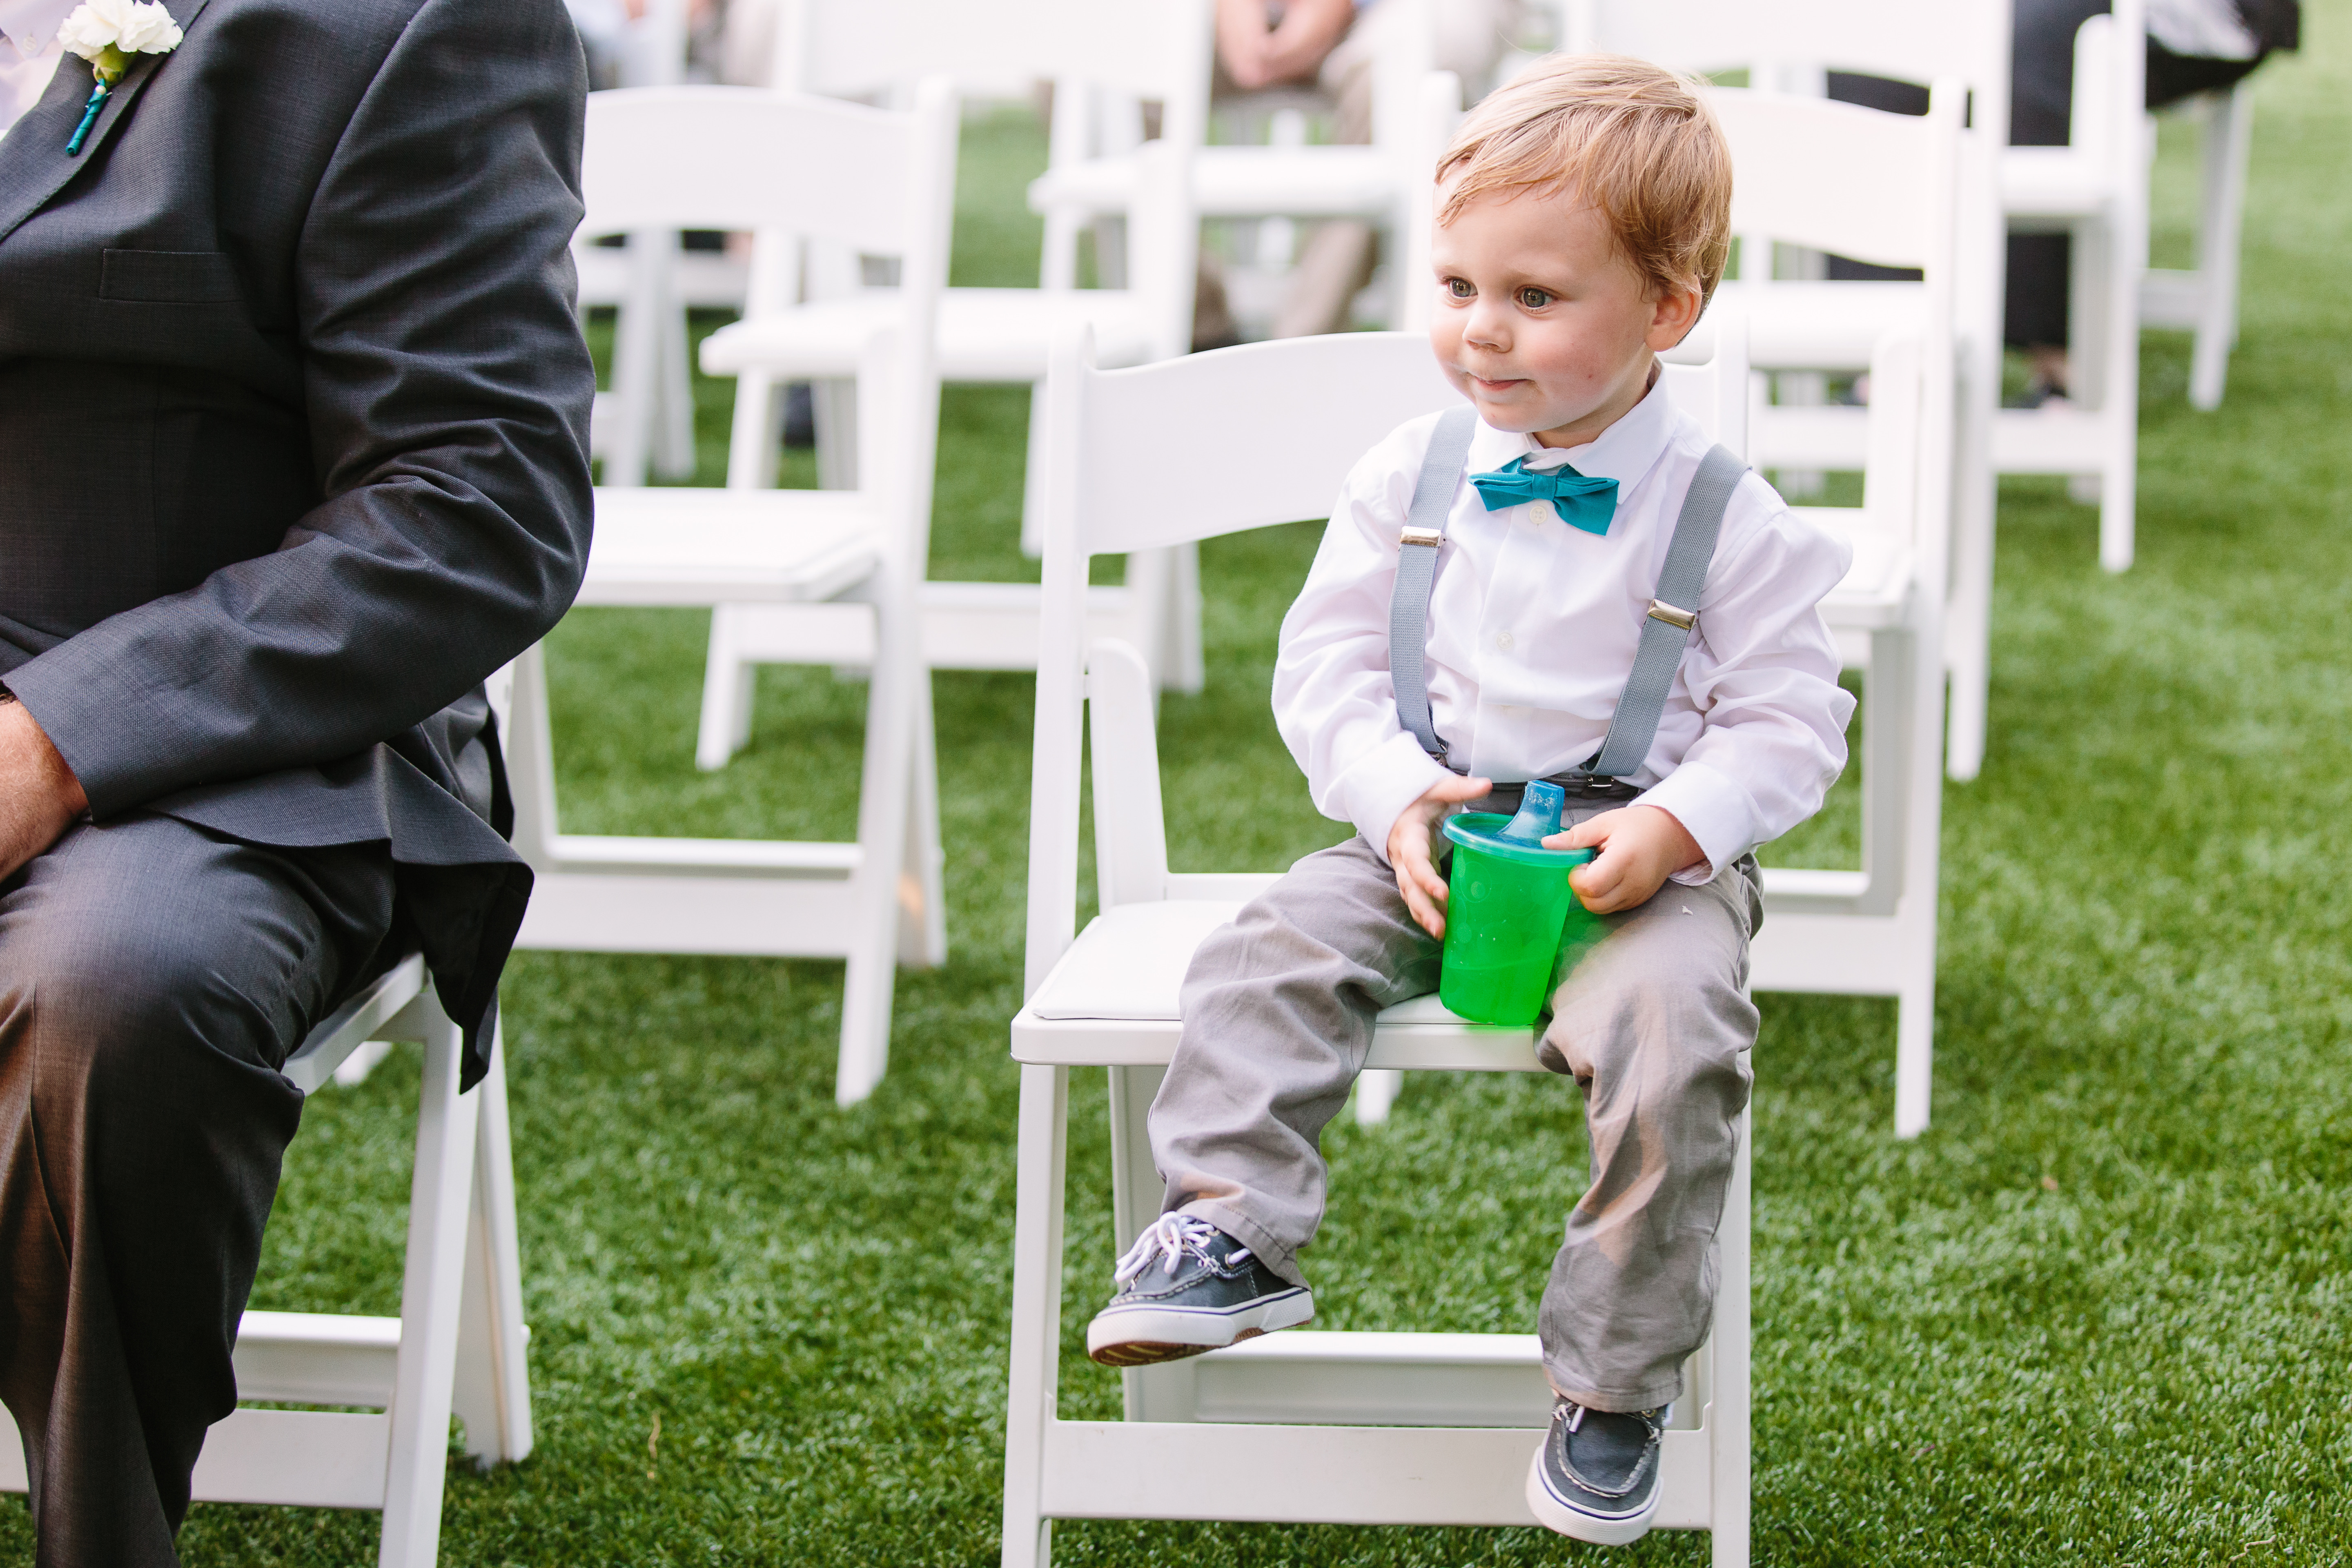 A toddler sits in a white wedding venue chair holding a green sippy cup